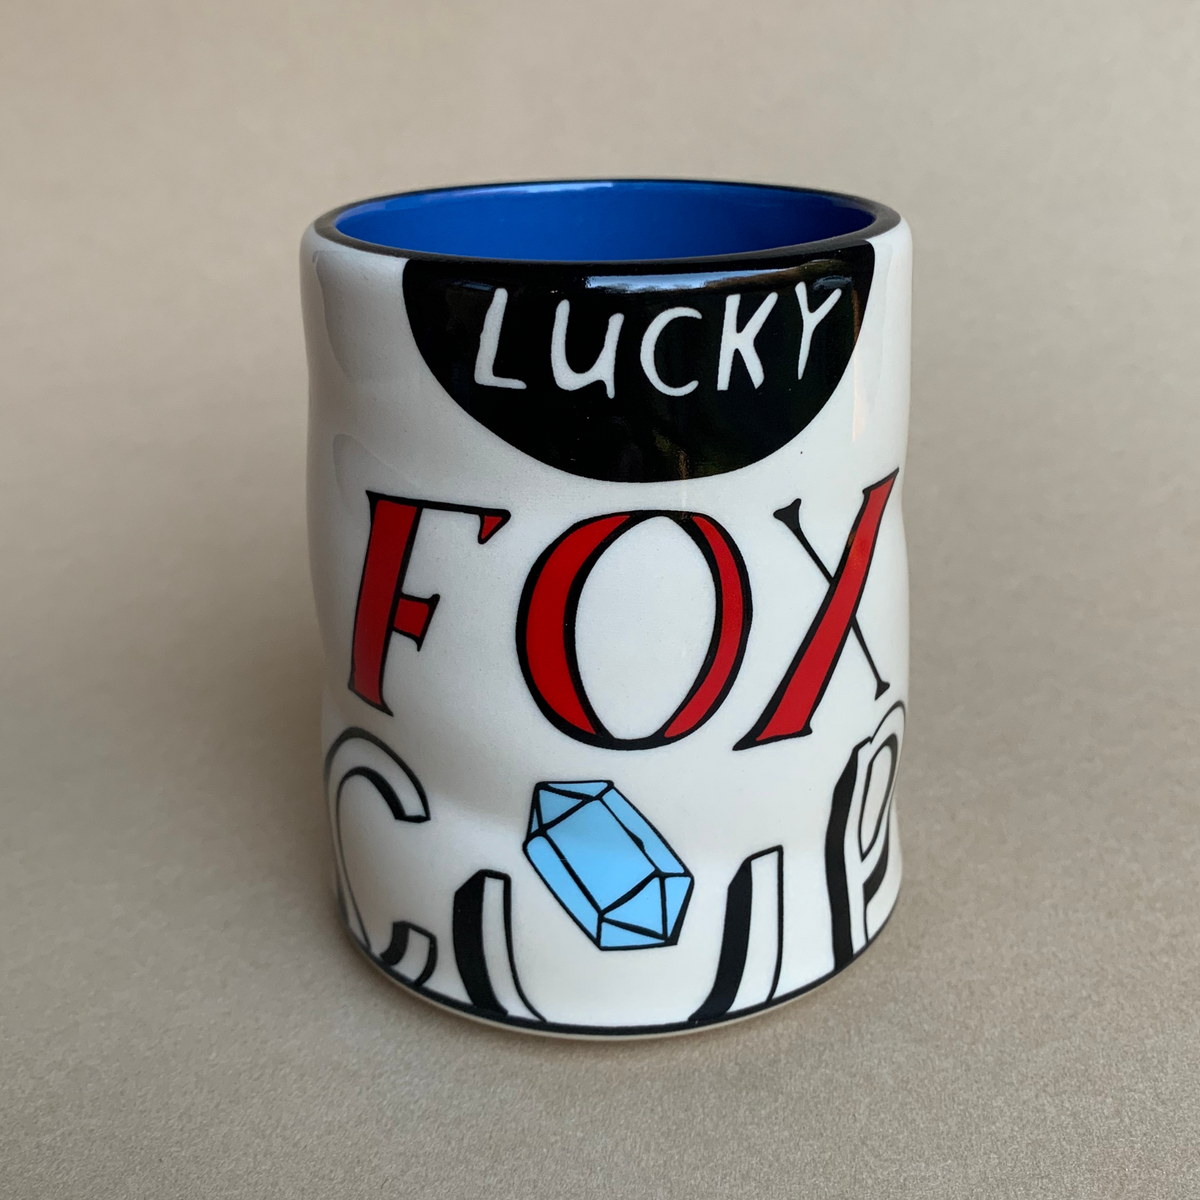 Lucky Fox Cup - Large